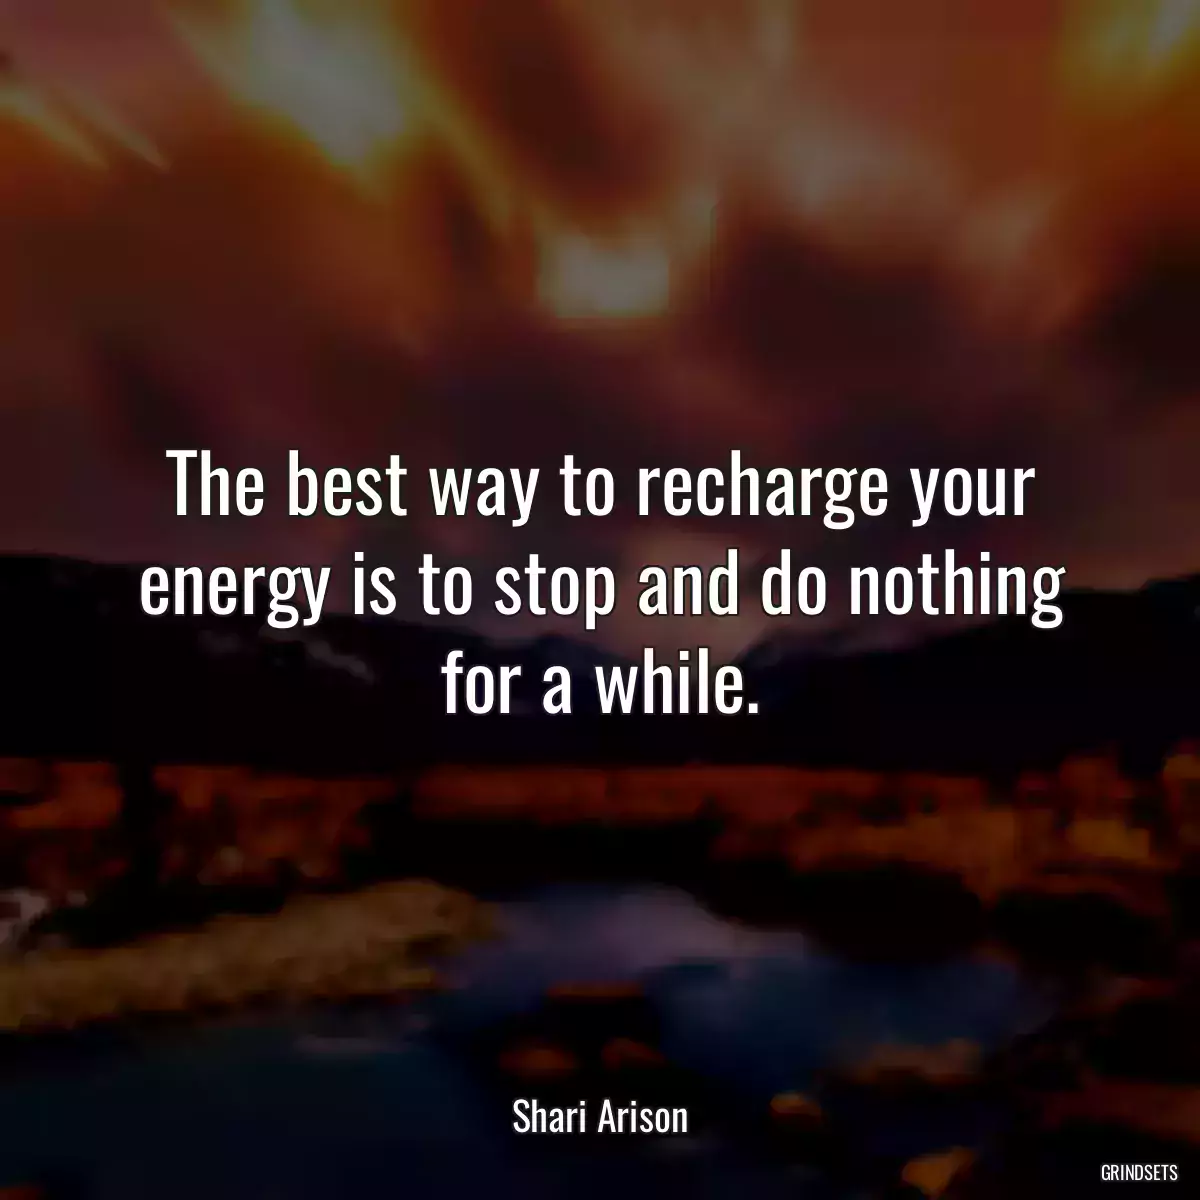 The best way to recharge your energy is to stop and do nothing for a while.